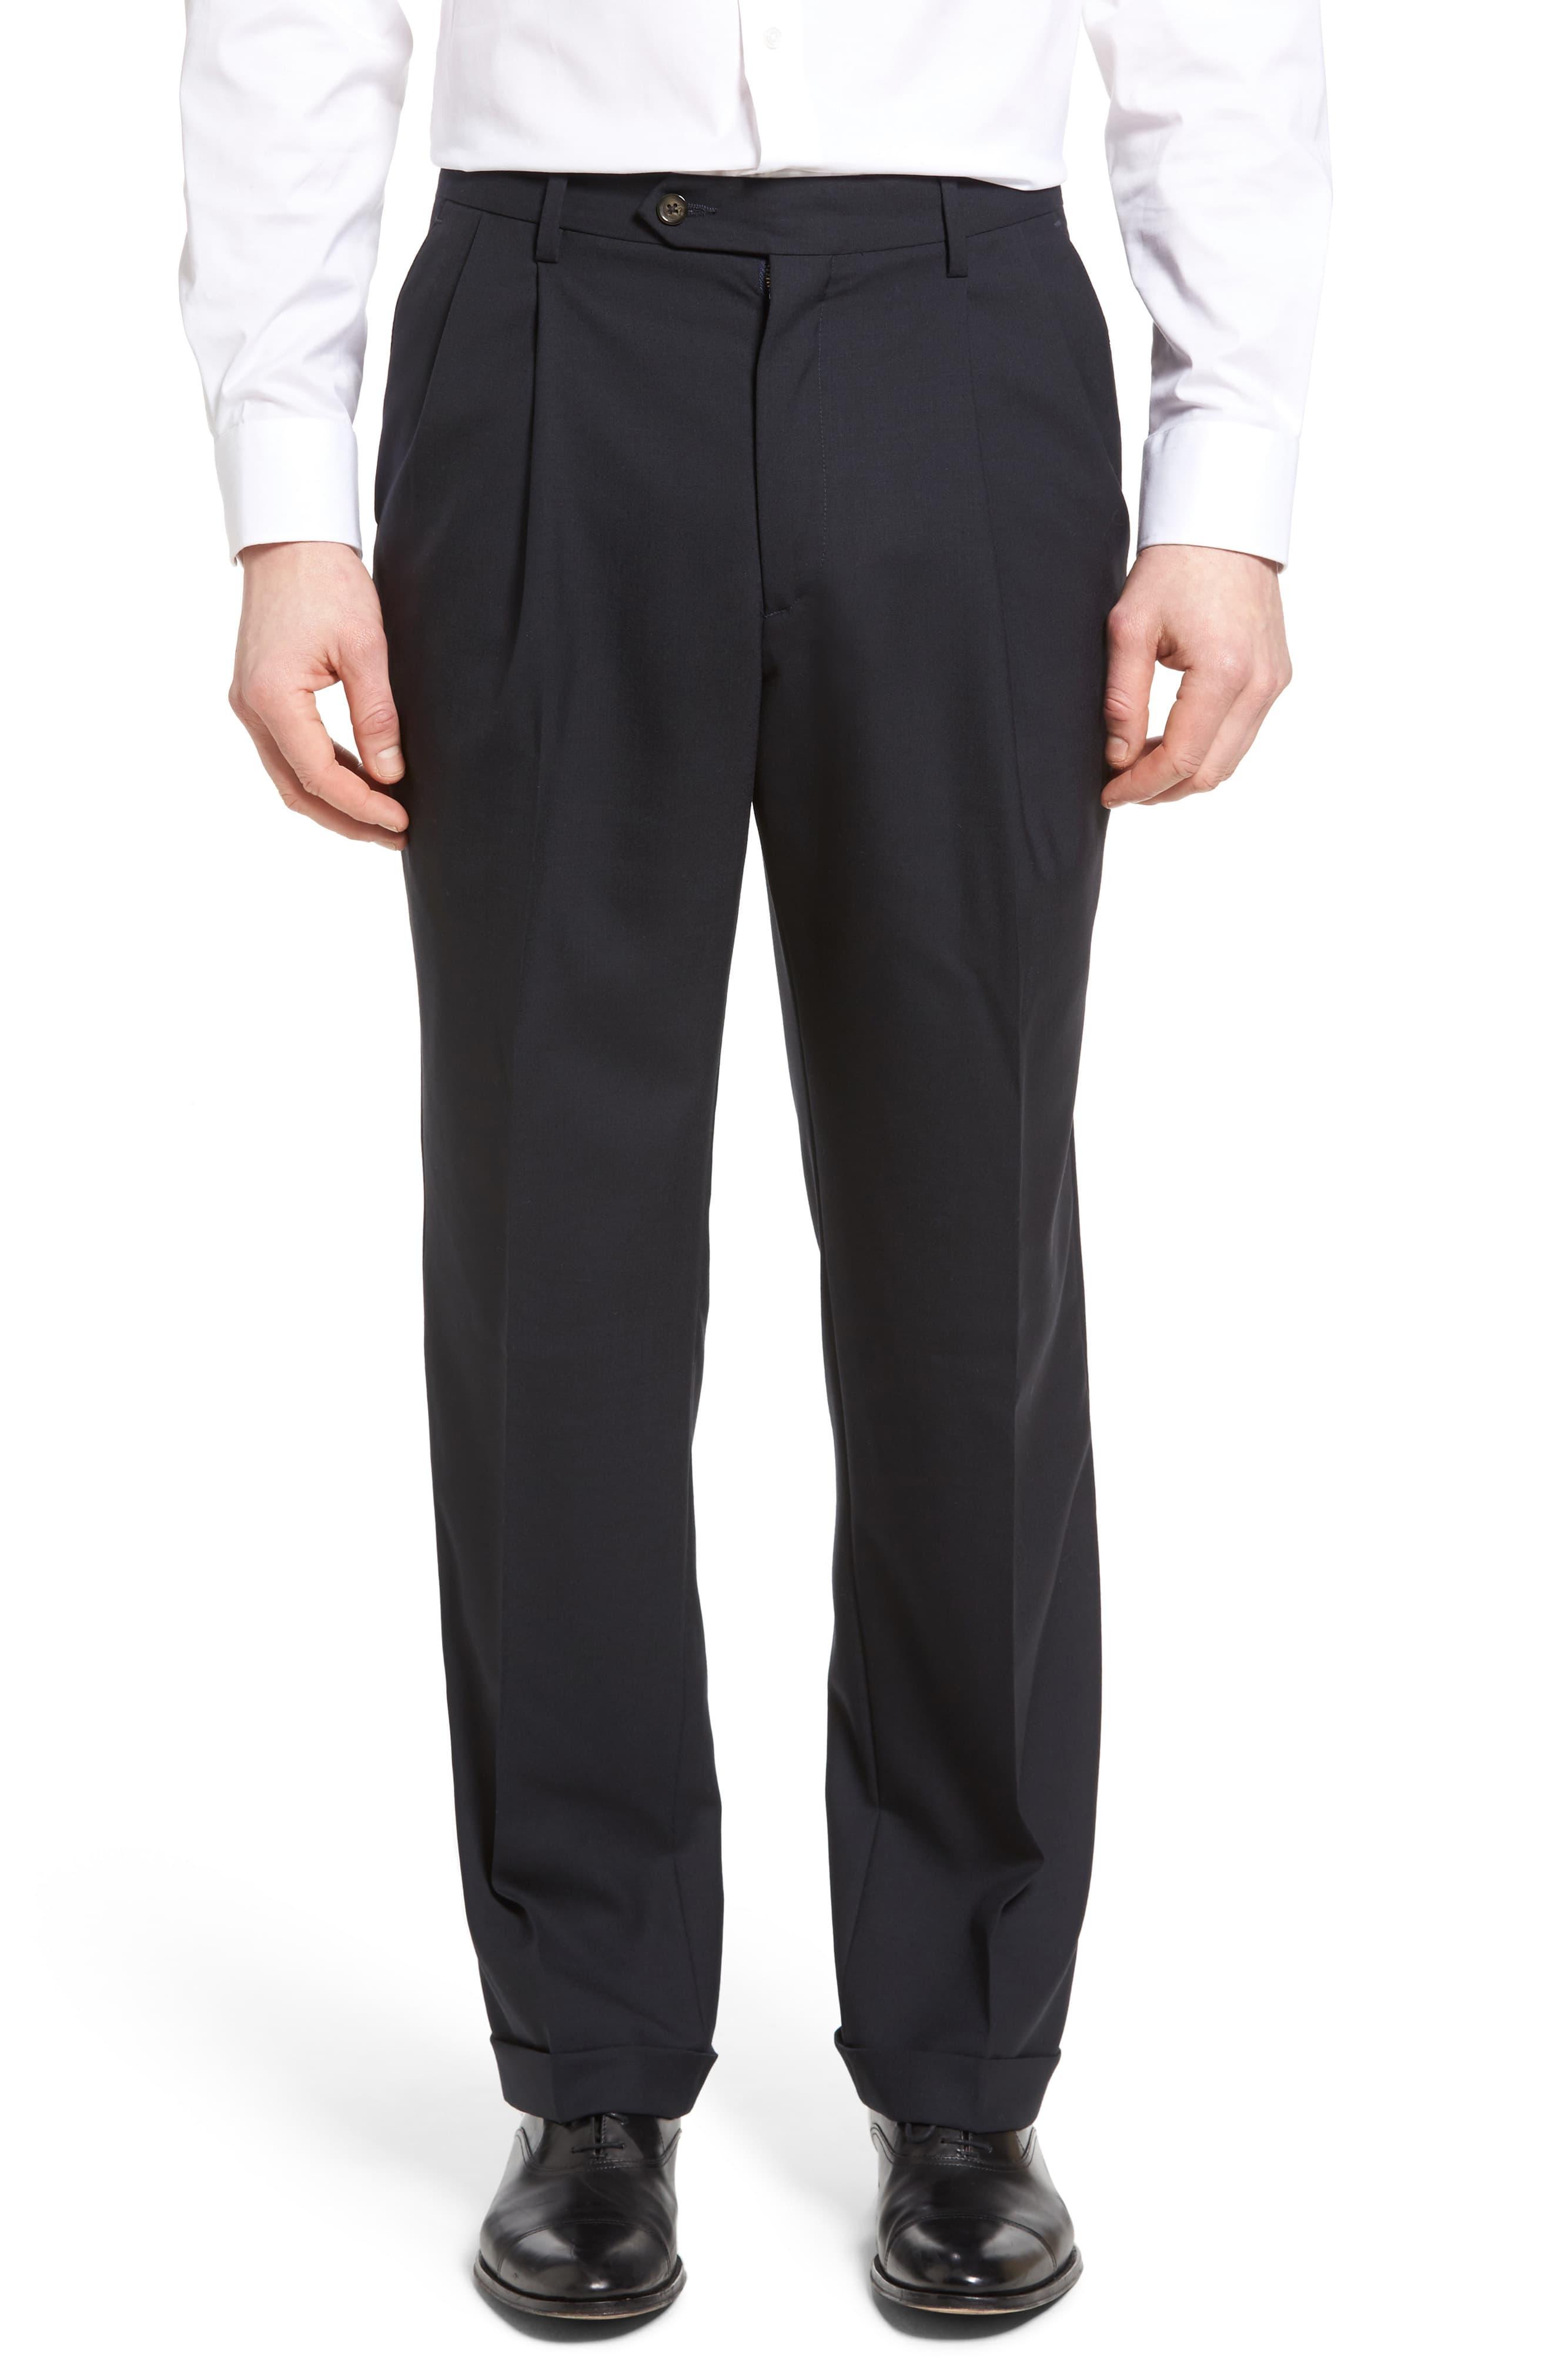 Berle Pleated Solid Wool Trousers in Navy (Blue) for Men - Lyst